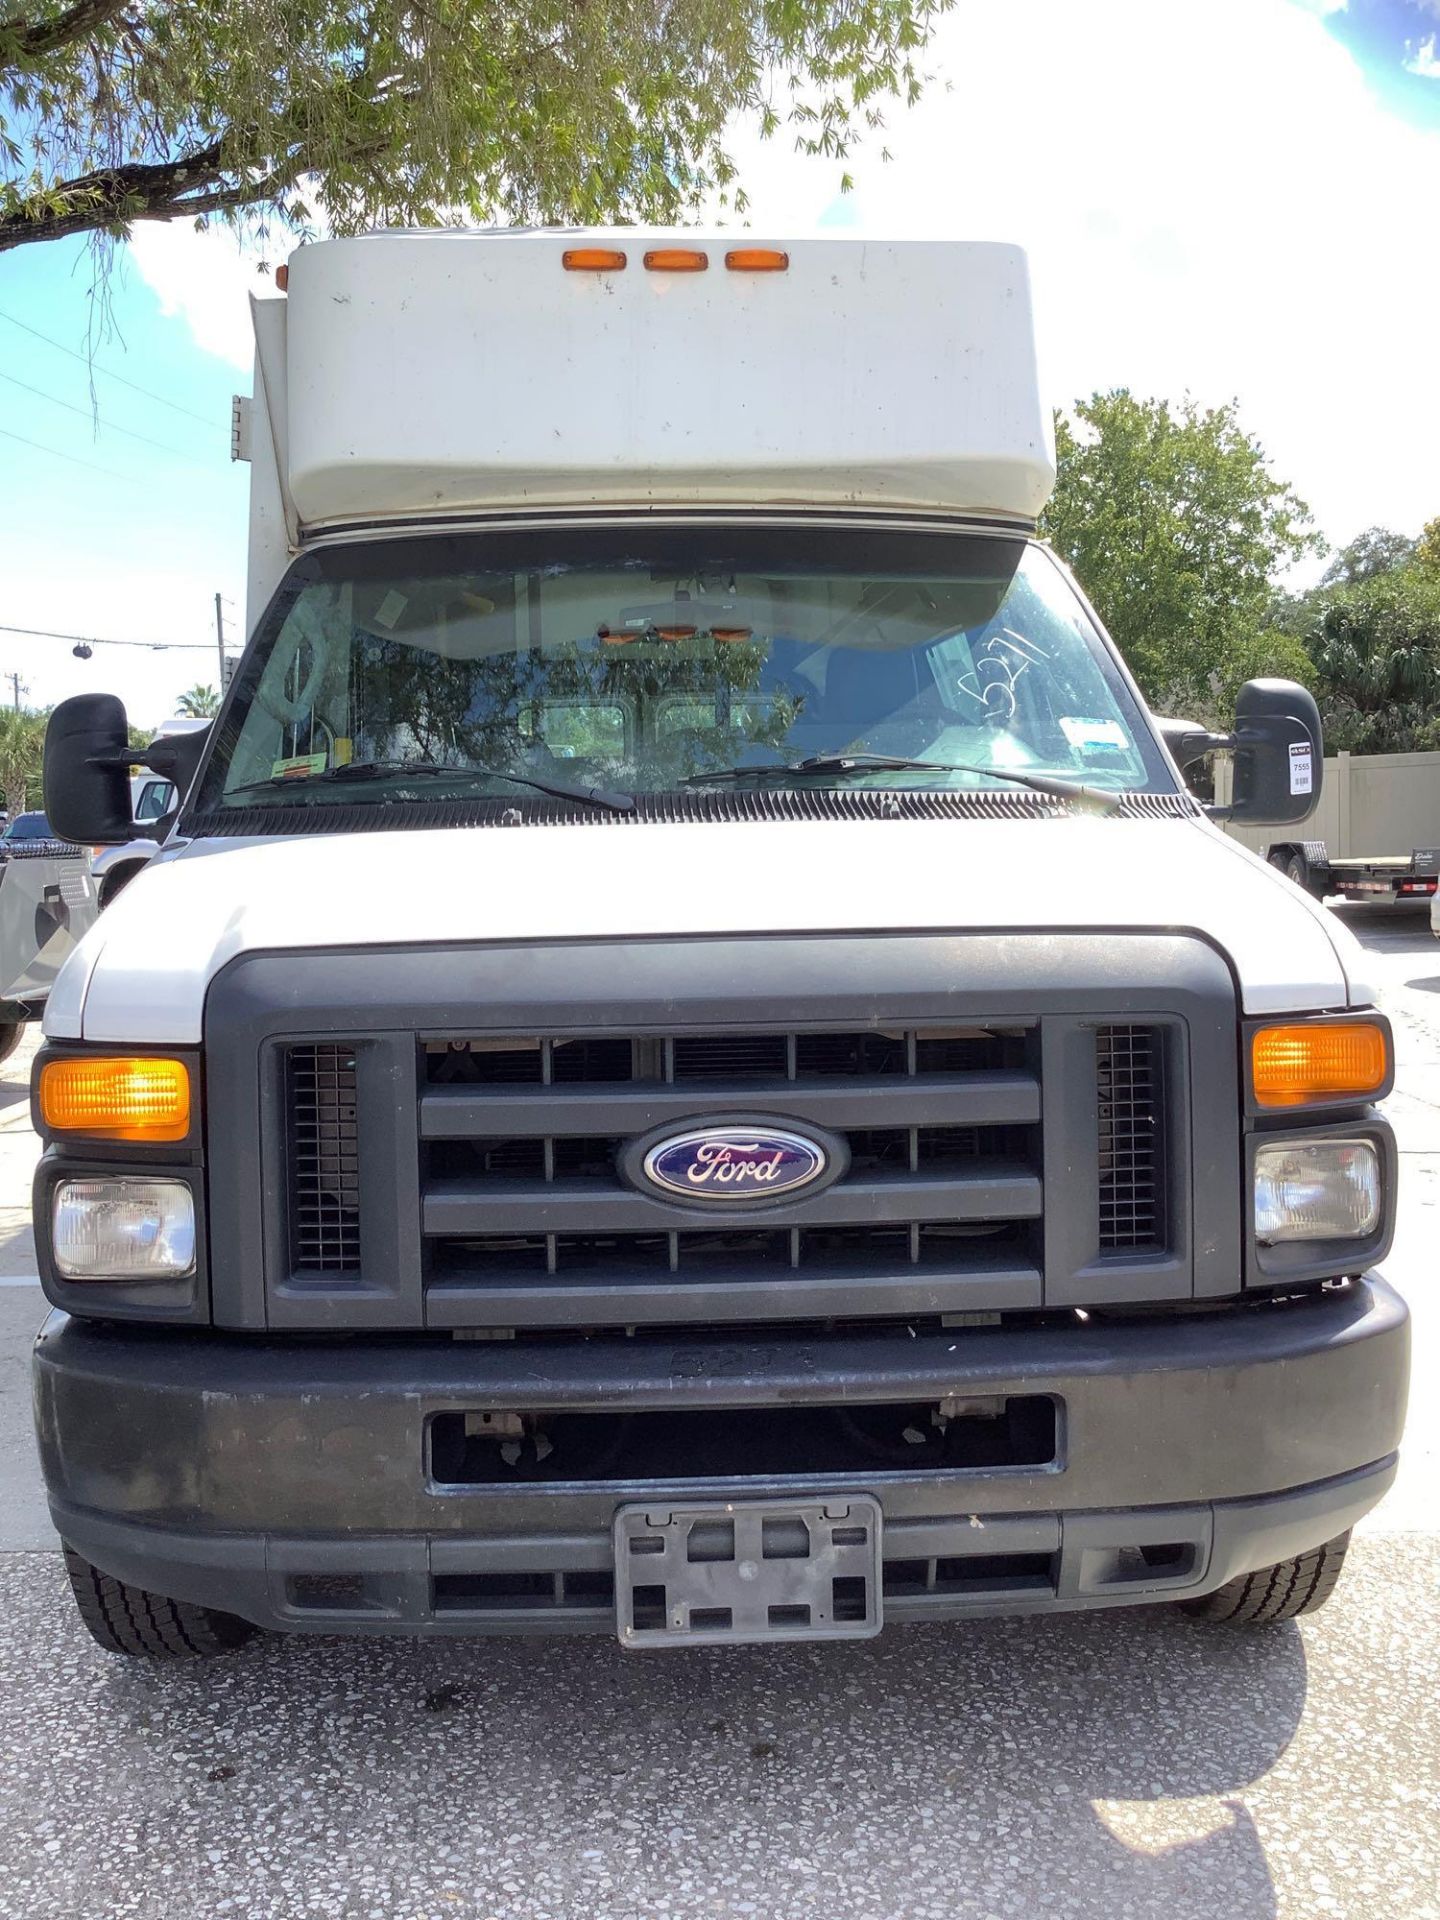 2014 FORD ECONOLINE E-350 SUPER DUTY EXTENDED MOBILITY VAN , AUTOMATIC, AC/ HEAT AIR CONDITION, BRAU - Image 14 of 34